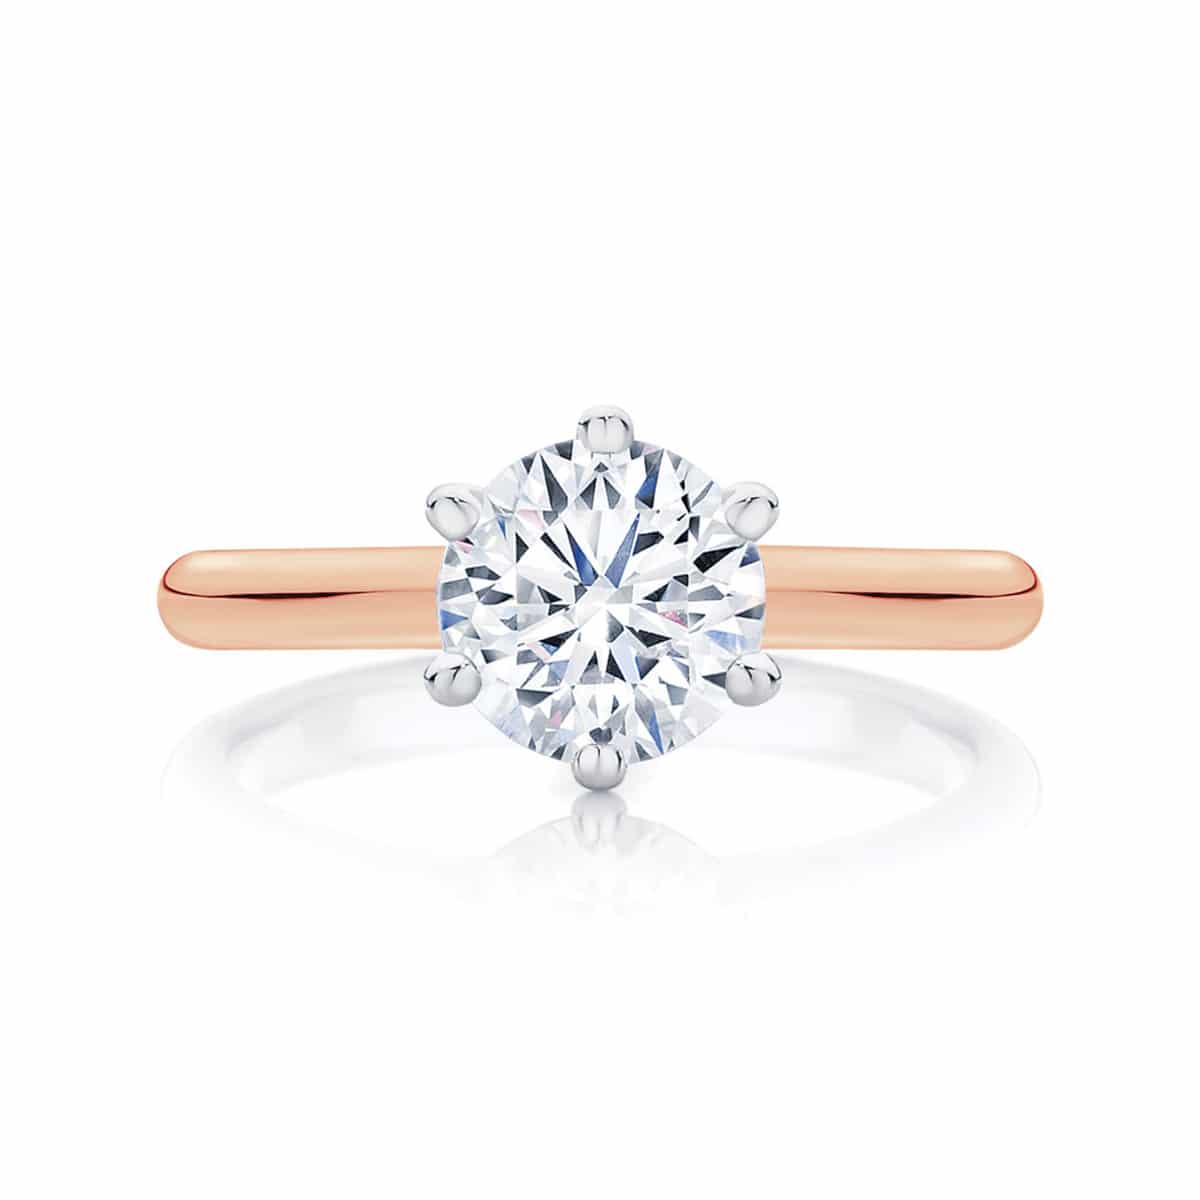 Rose Gold Engagement Rings - Who Should Buy Them?